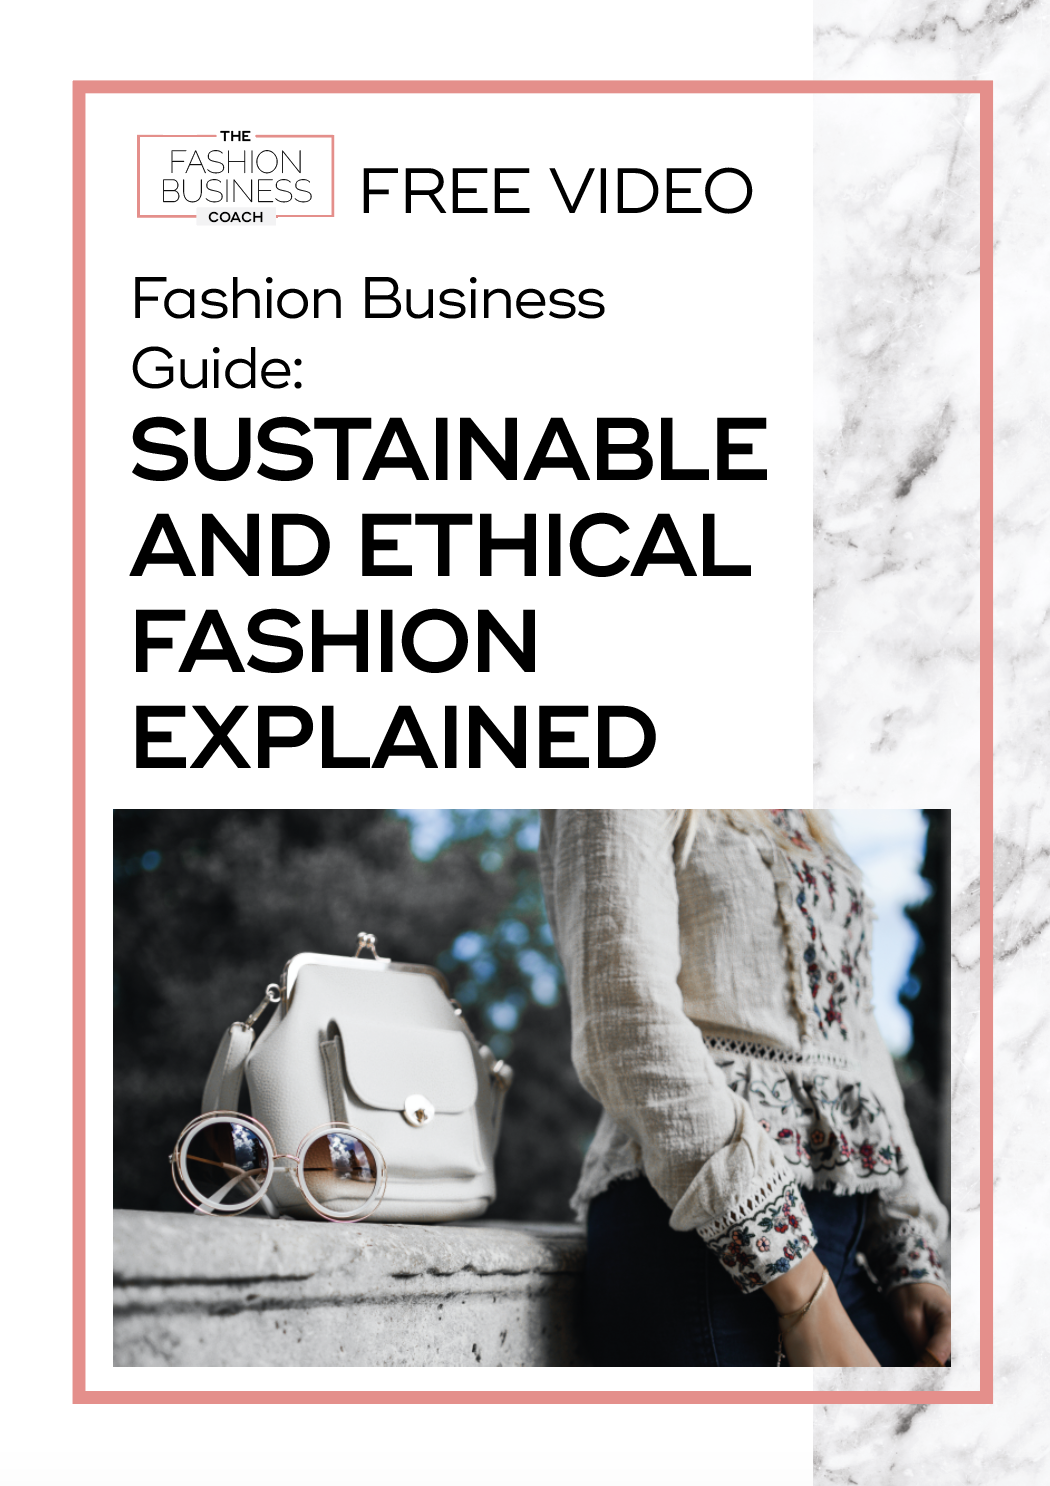 Fashion Business Guide Sustainable and Ethical Fashion Explained 3.png